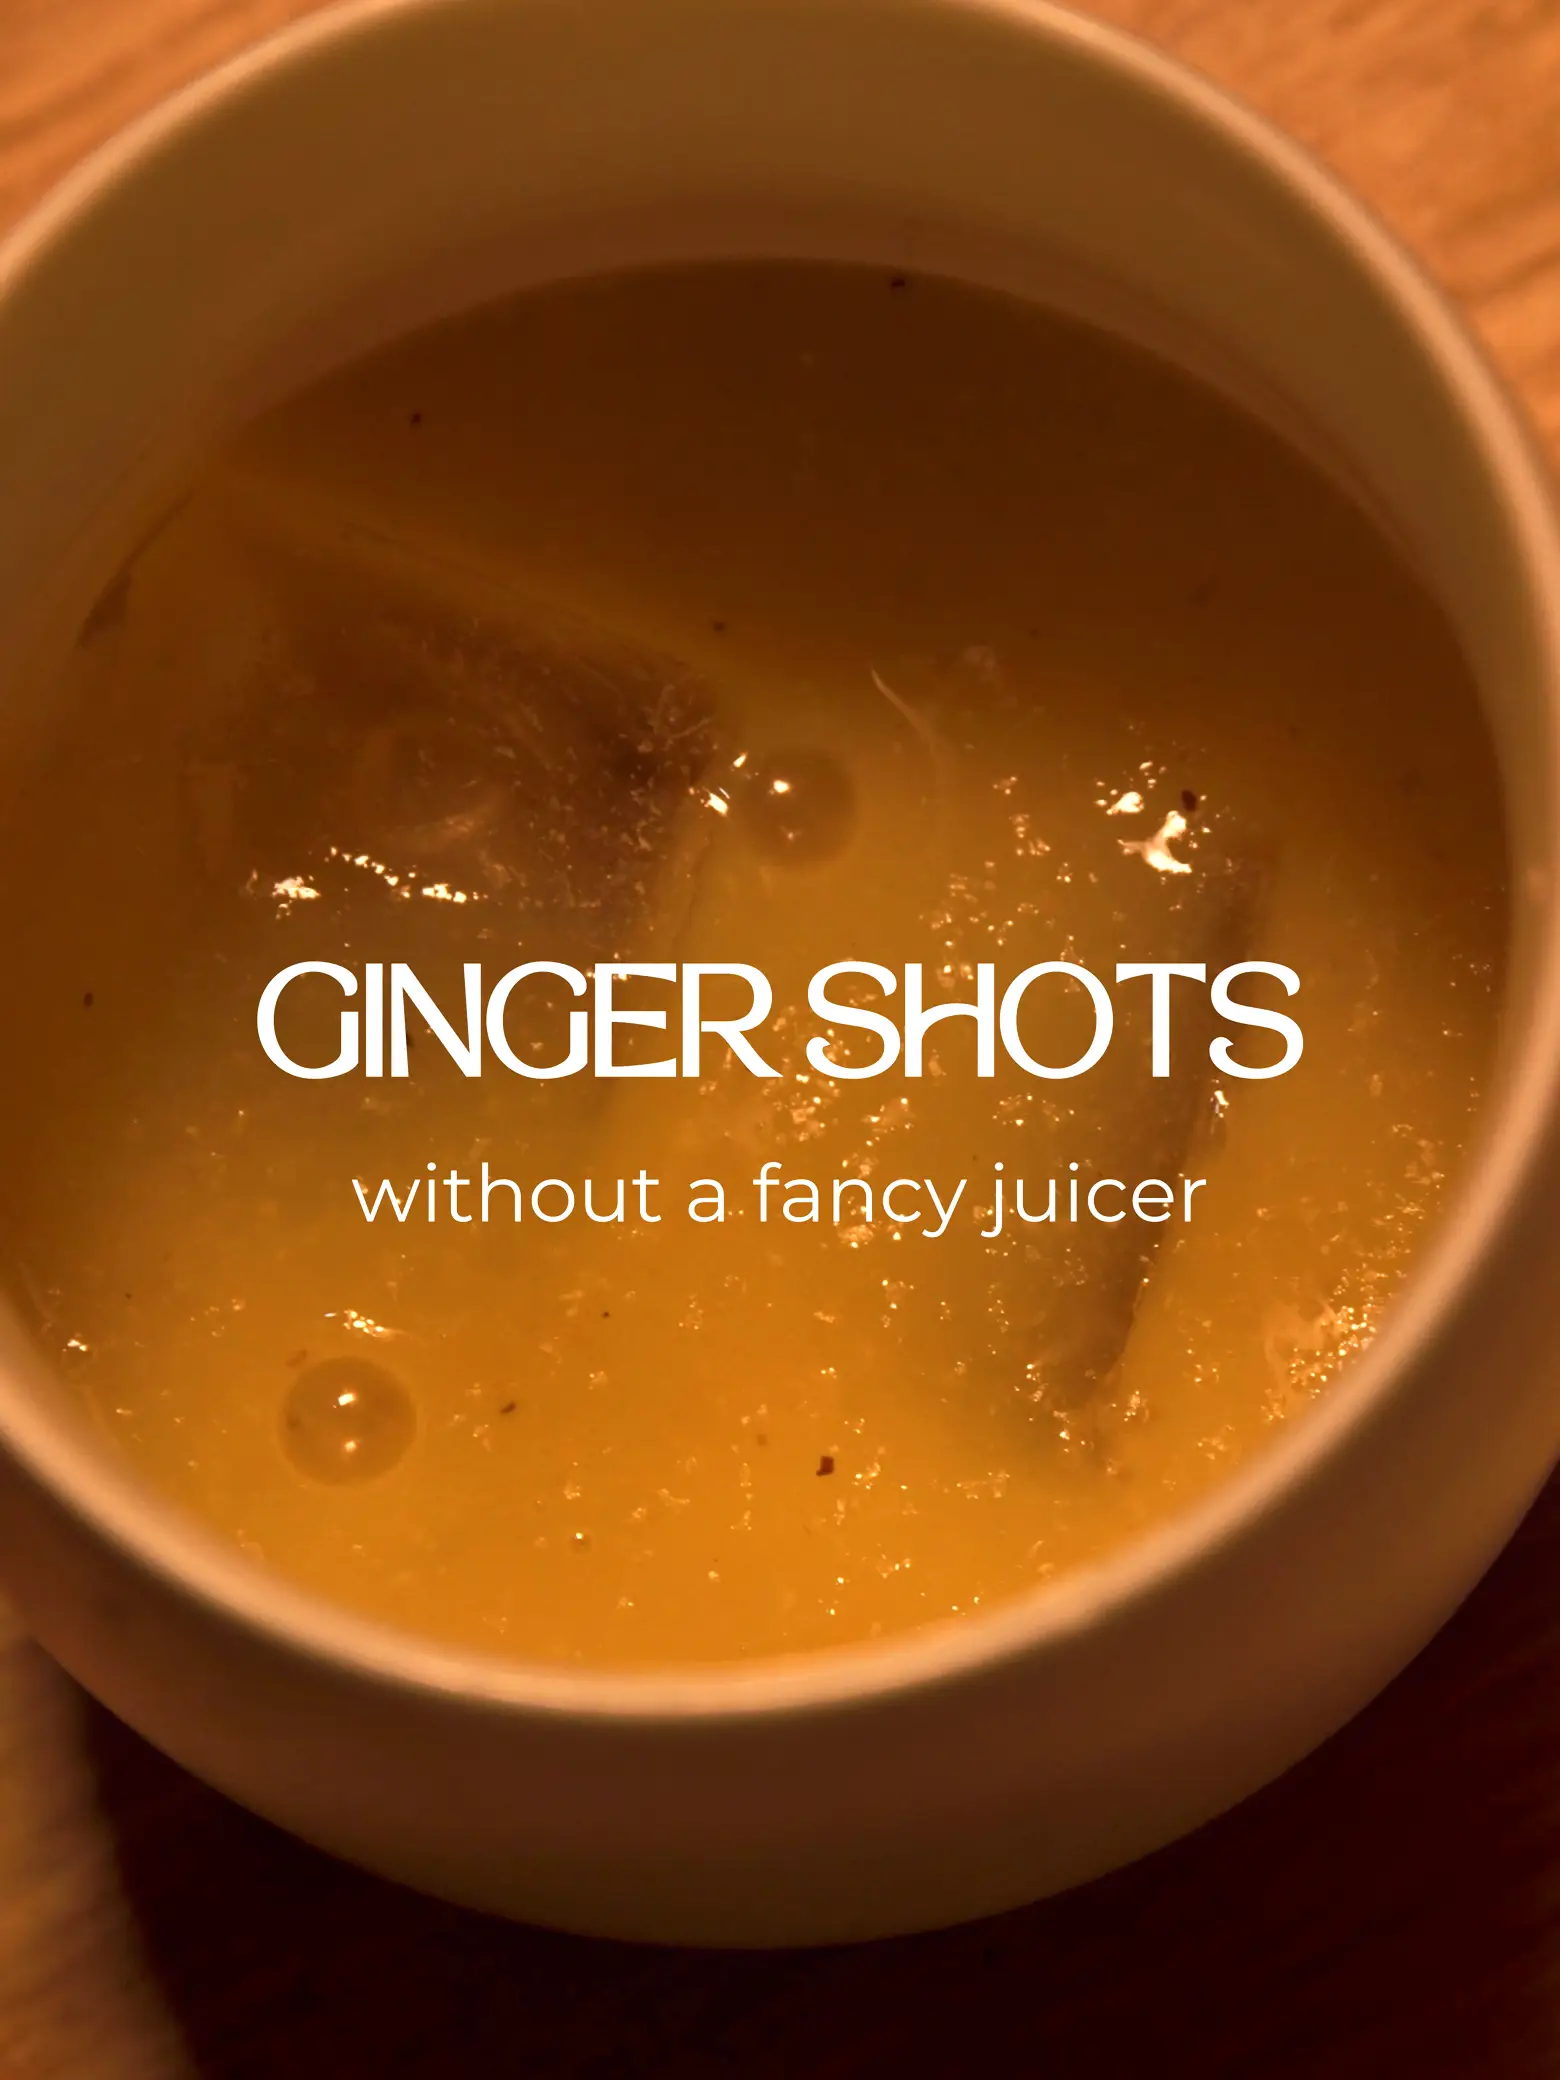 This mini juicer was right on time. Ginger shots on me